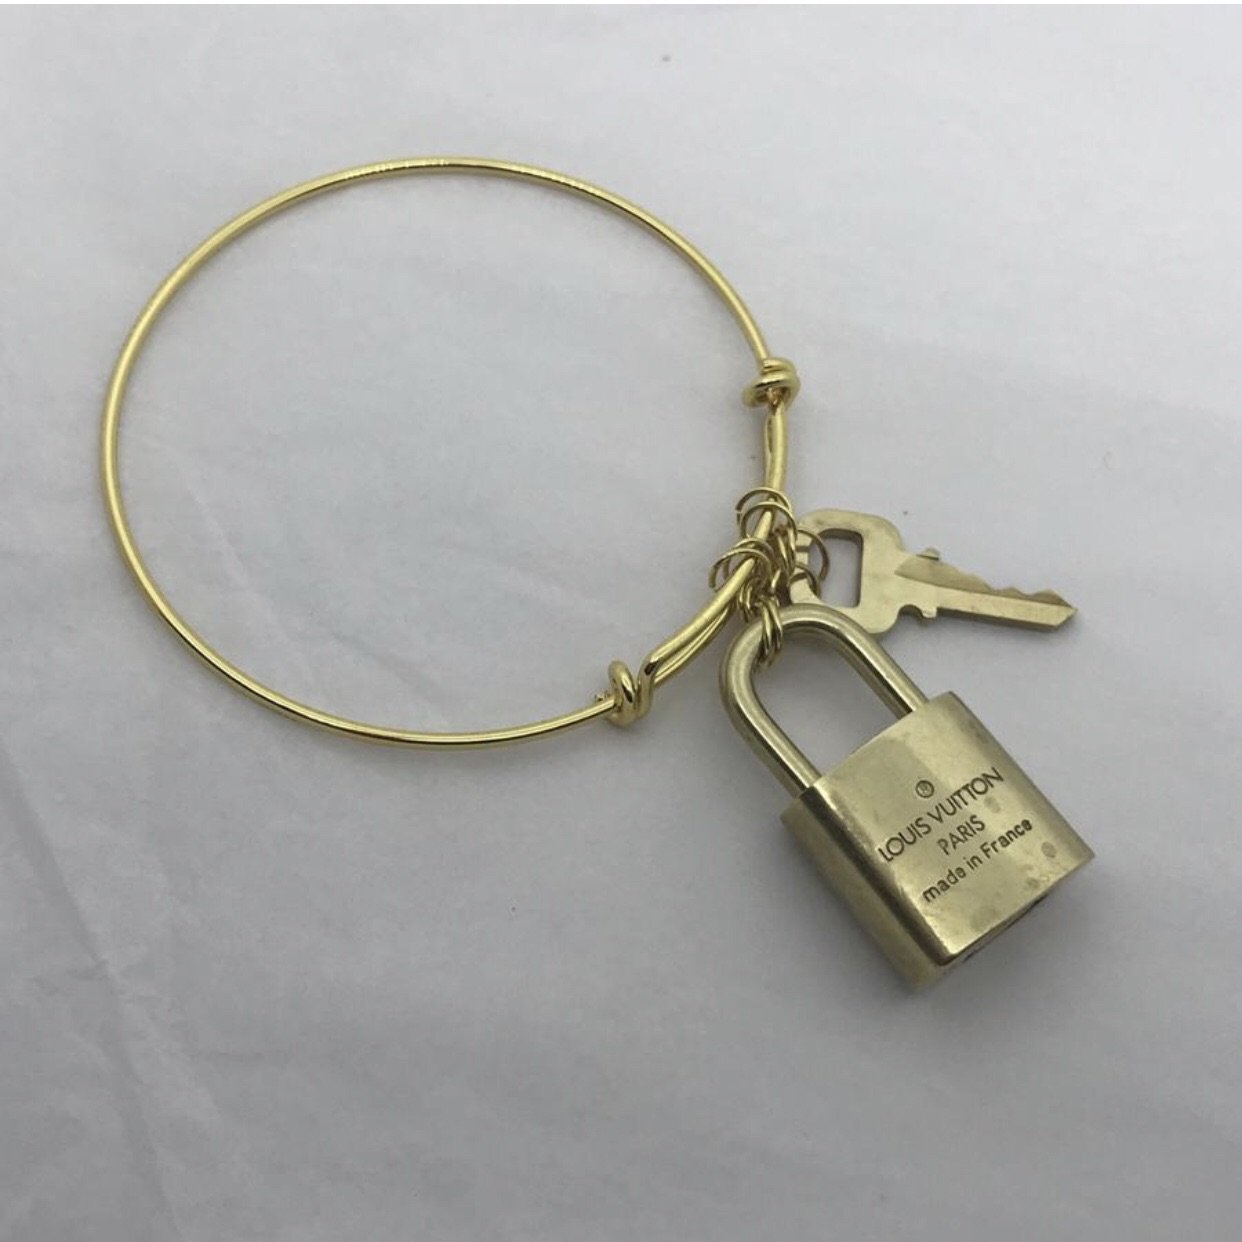 AUTH LOUIS VUITTON LOCK AND KEY 308 HOUSE OF HARLOW CHAIN BRACELET GIFT SET